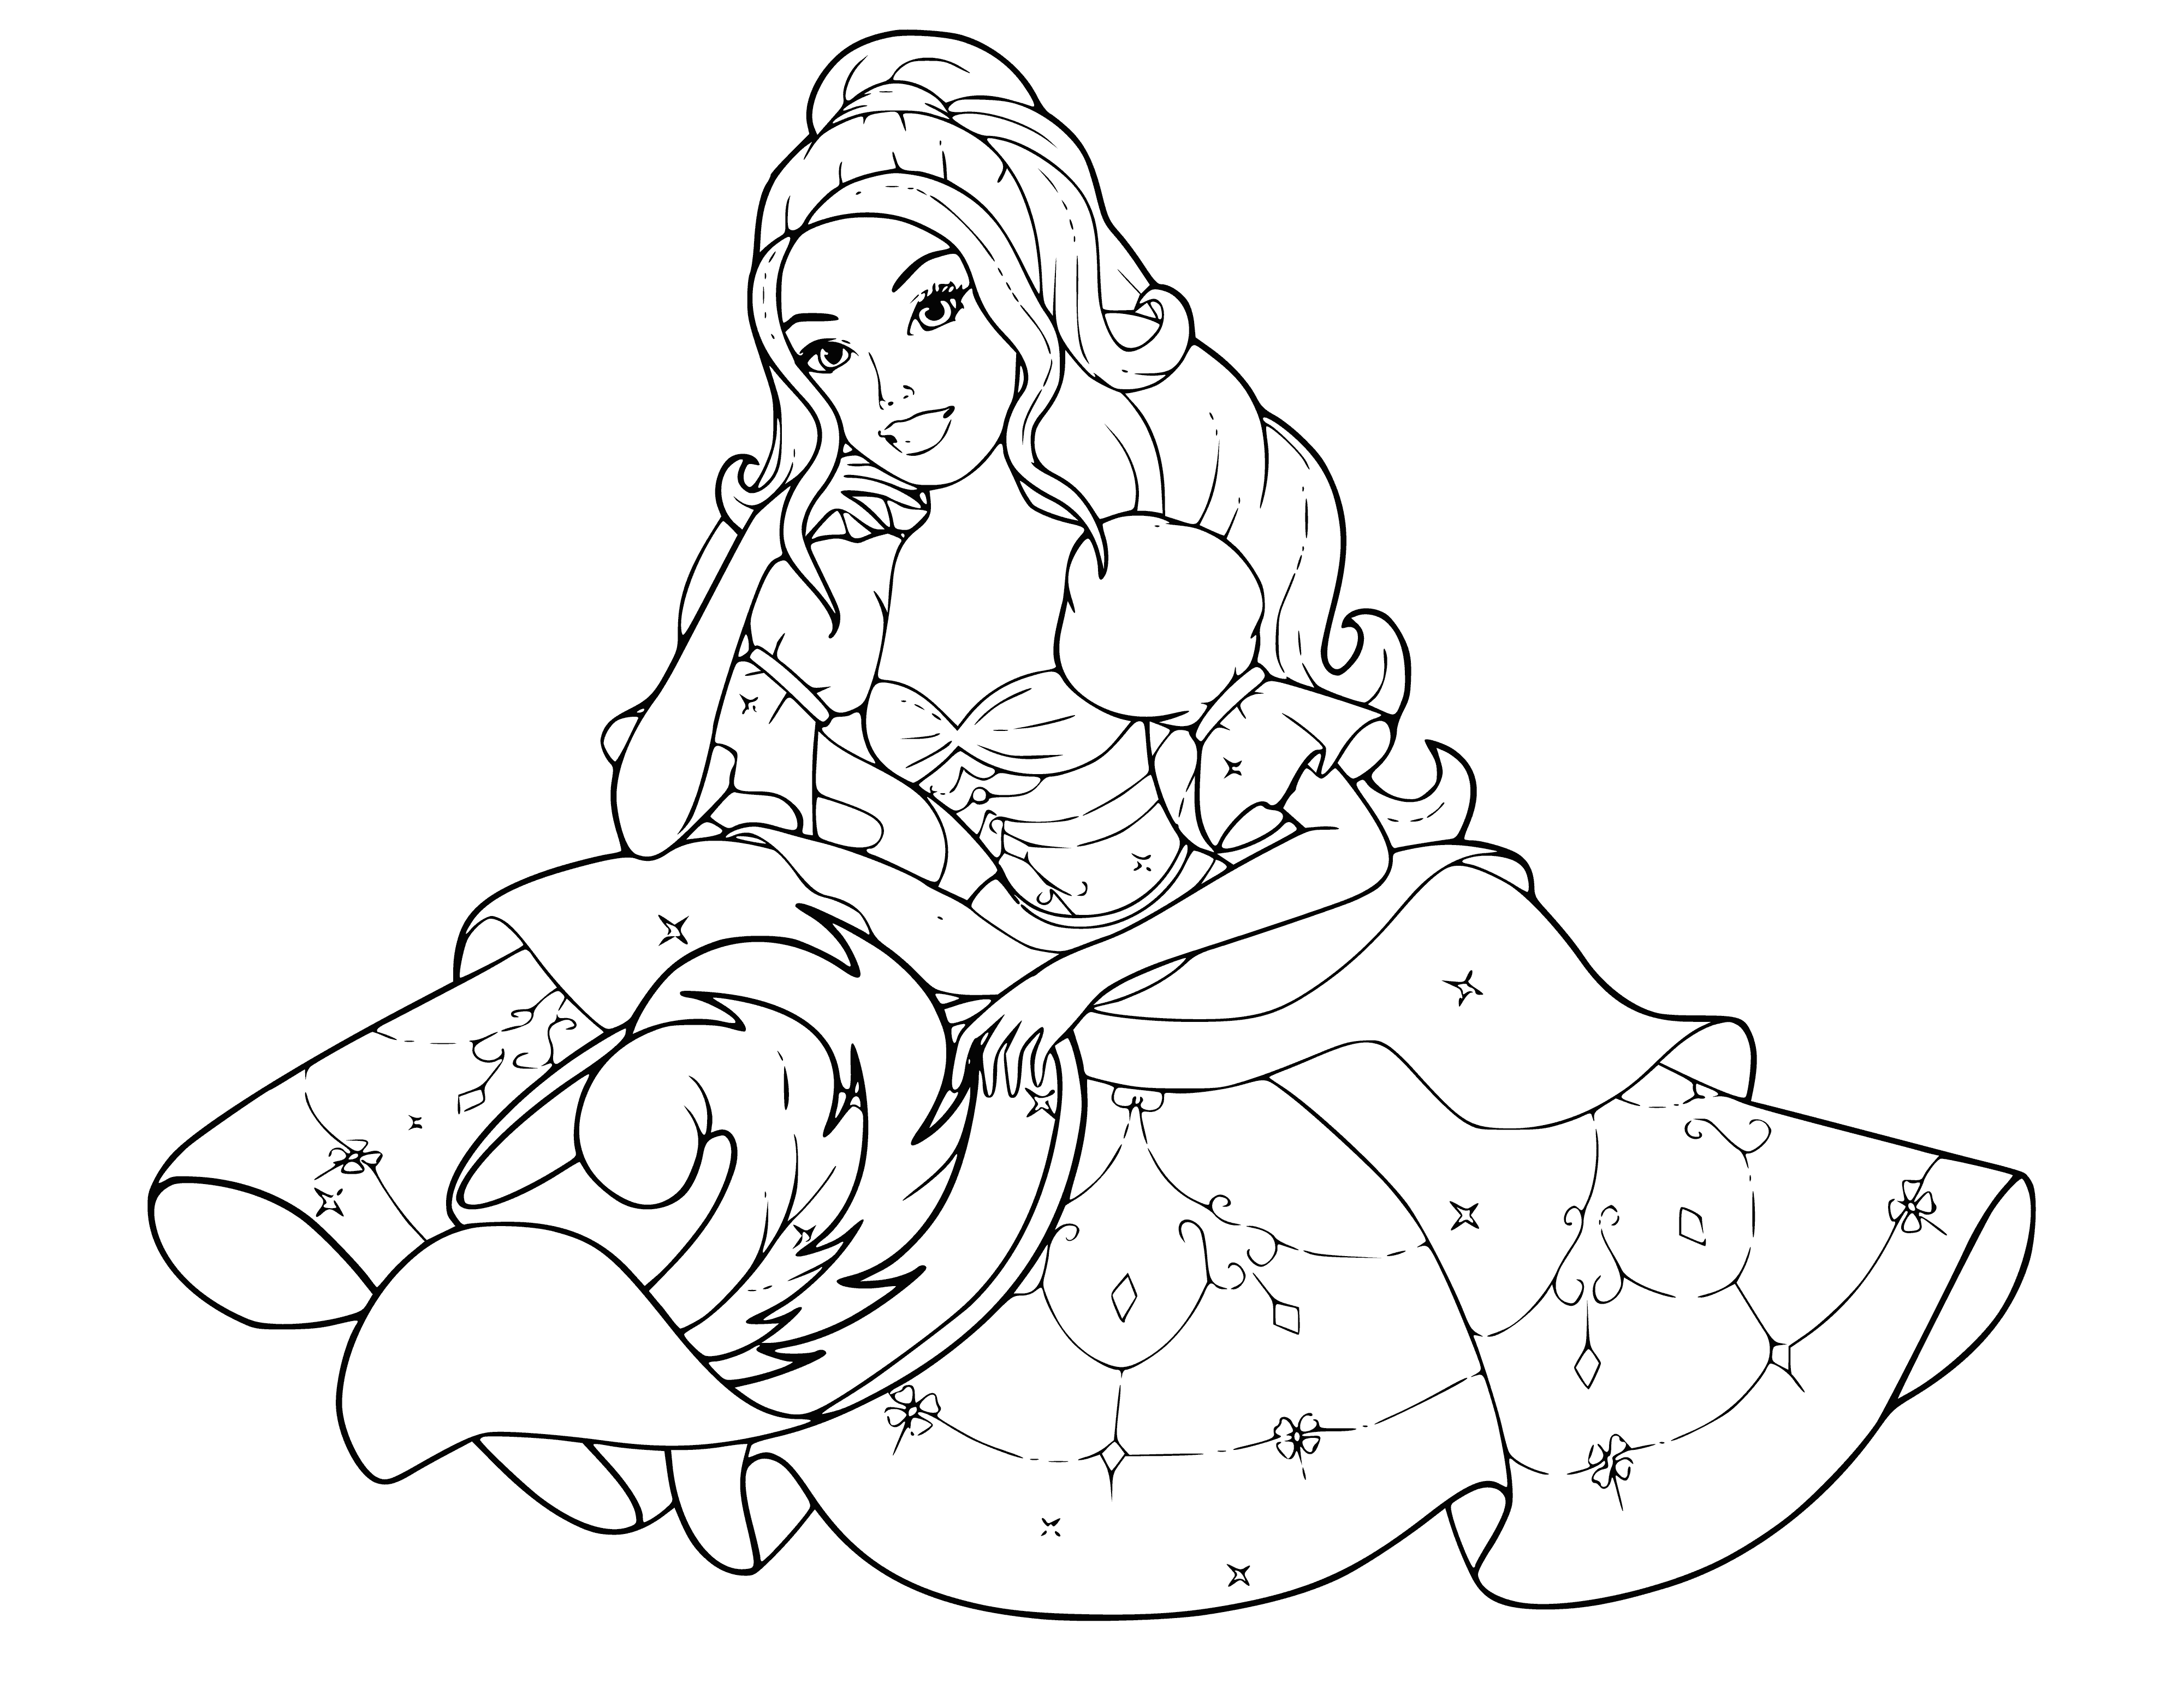 coloring page: Corinne is a Barbie musketeer with a hat in her hand. #Barbie #Musketeers